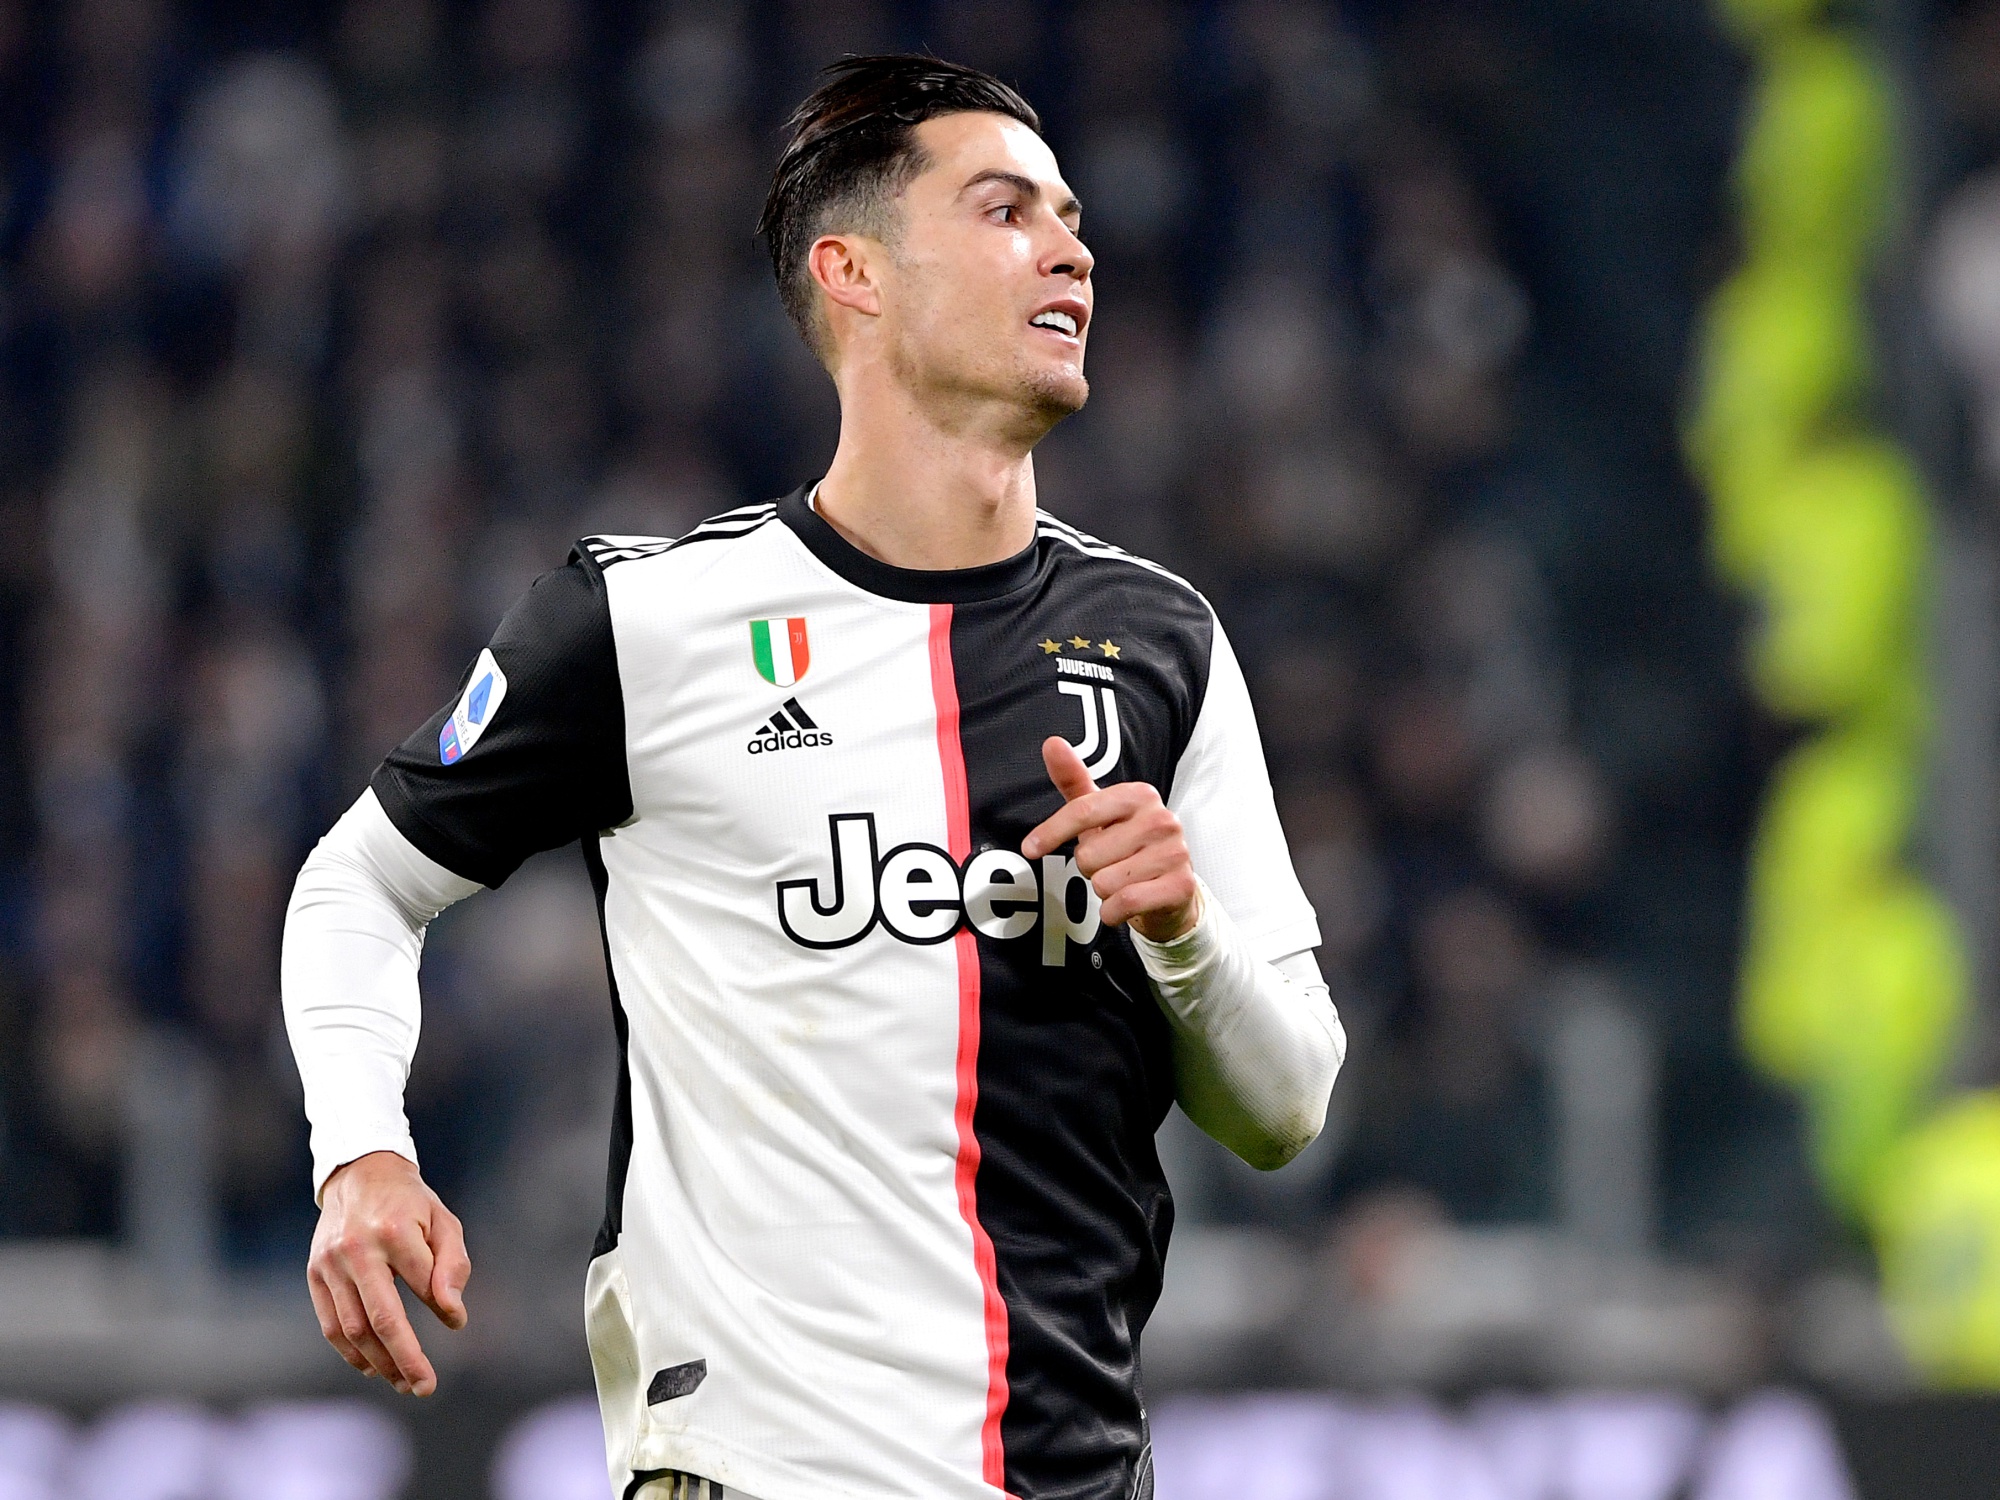 Juventus to Lose Money Until Ronaldo Deal Ends, Analyst Says - Bloomberg